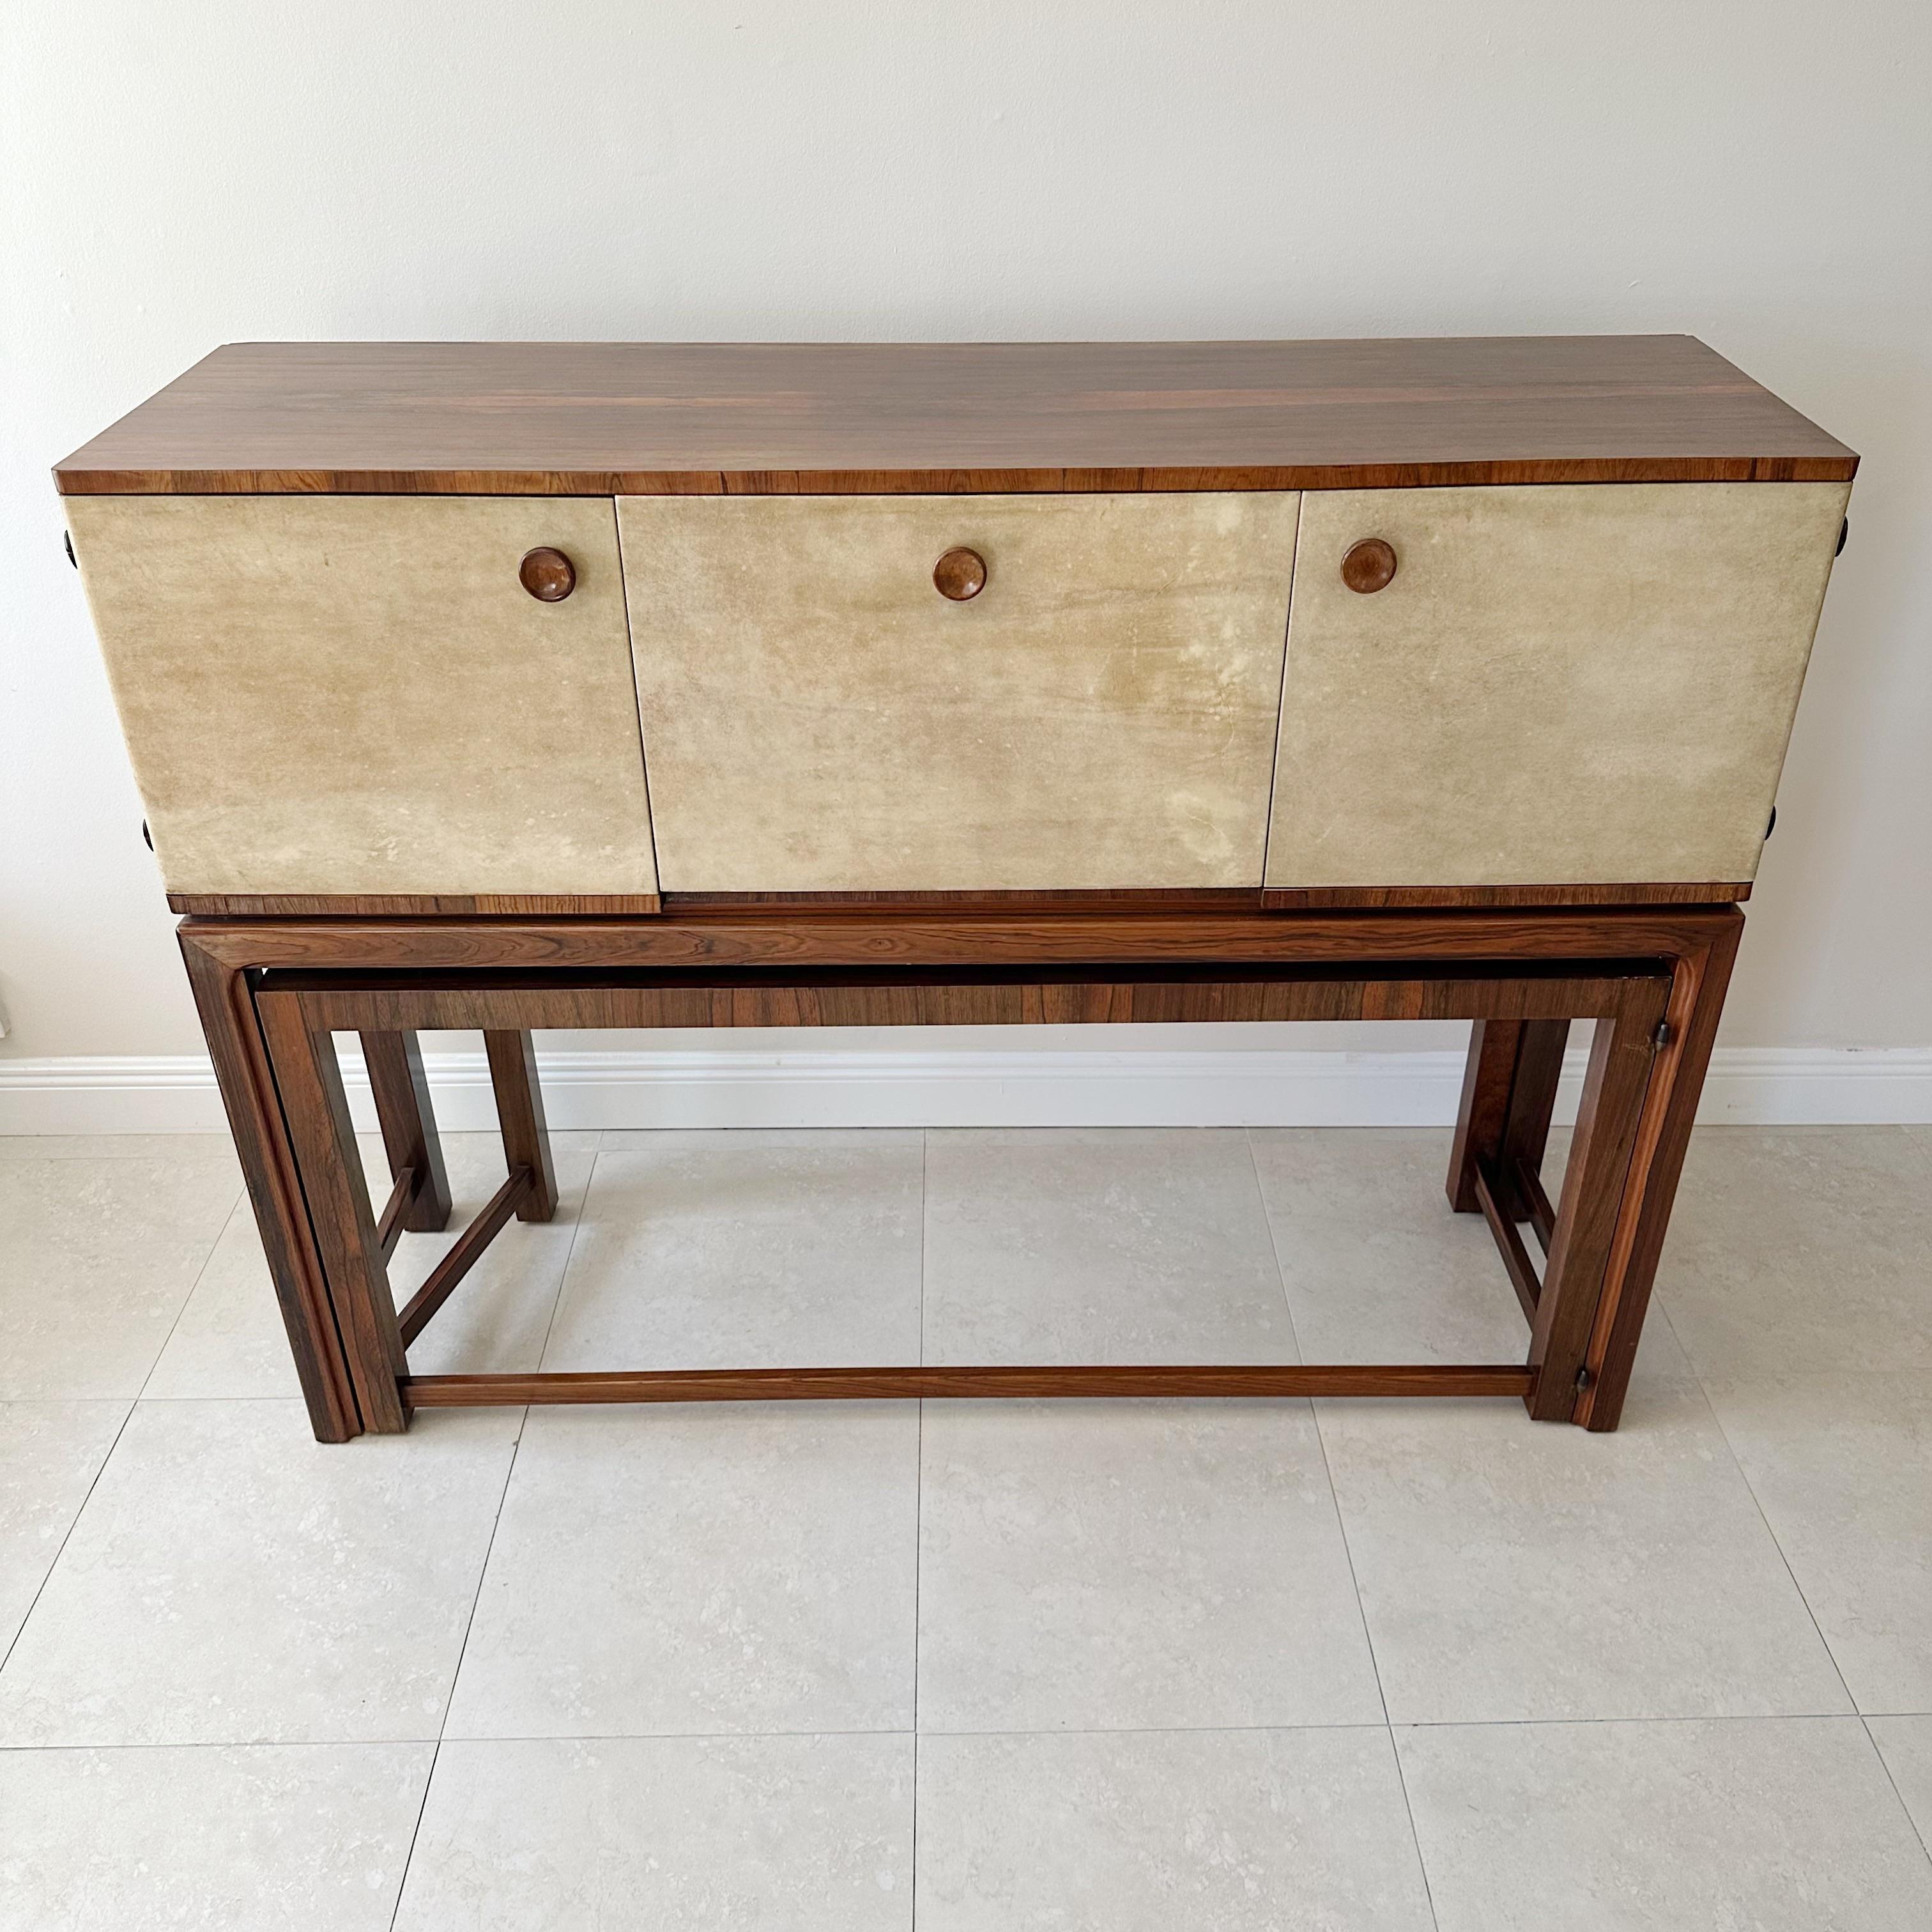 An exceptional chest on stand with a hidden roll-out table that can serve as a bar, server, or even a desk. The chest is crafted from rosewood and parchment and features solid brass bullet hardware. This piece dates back to the 1940s and is in